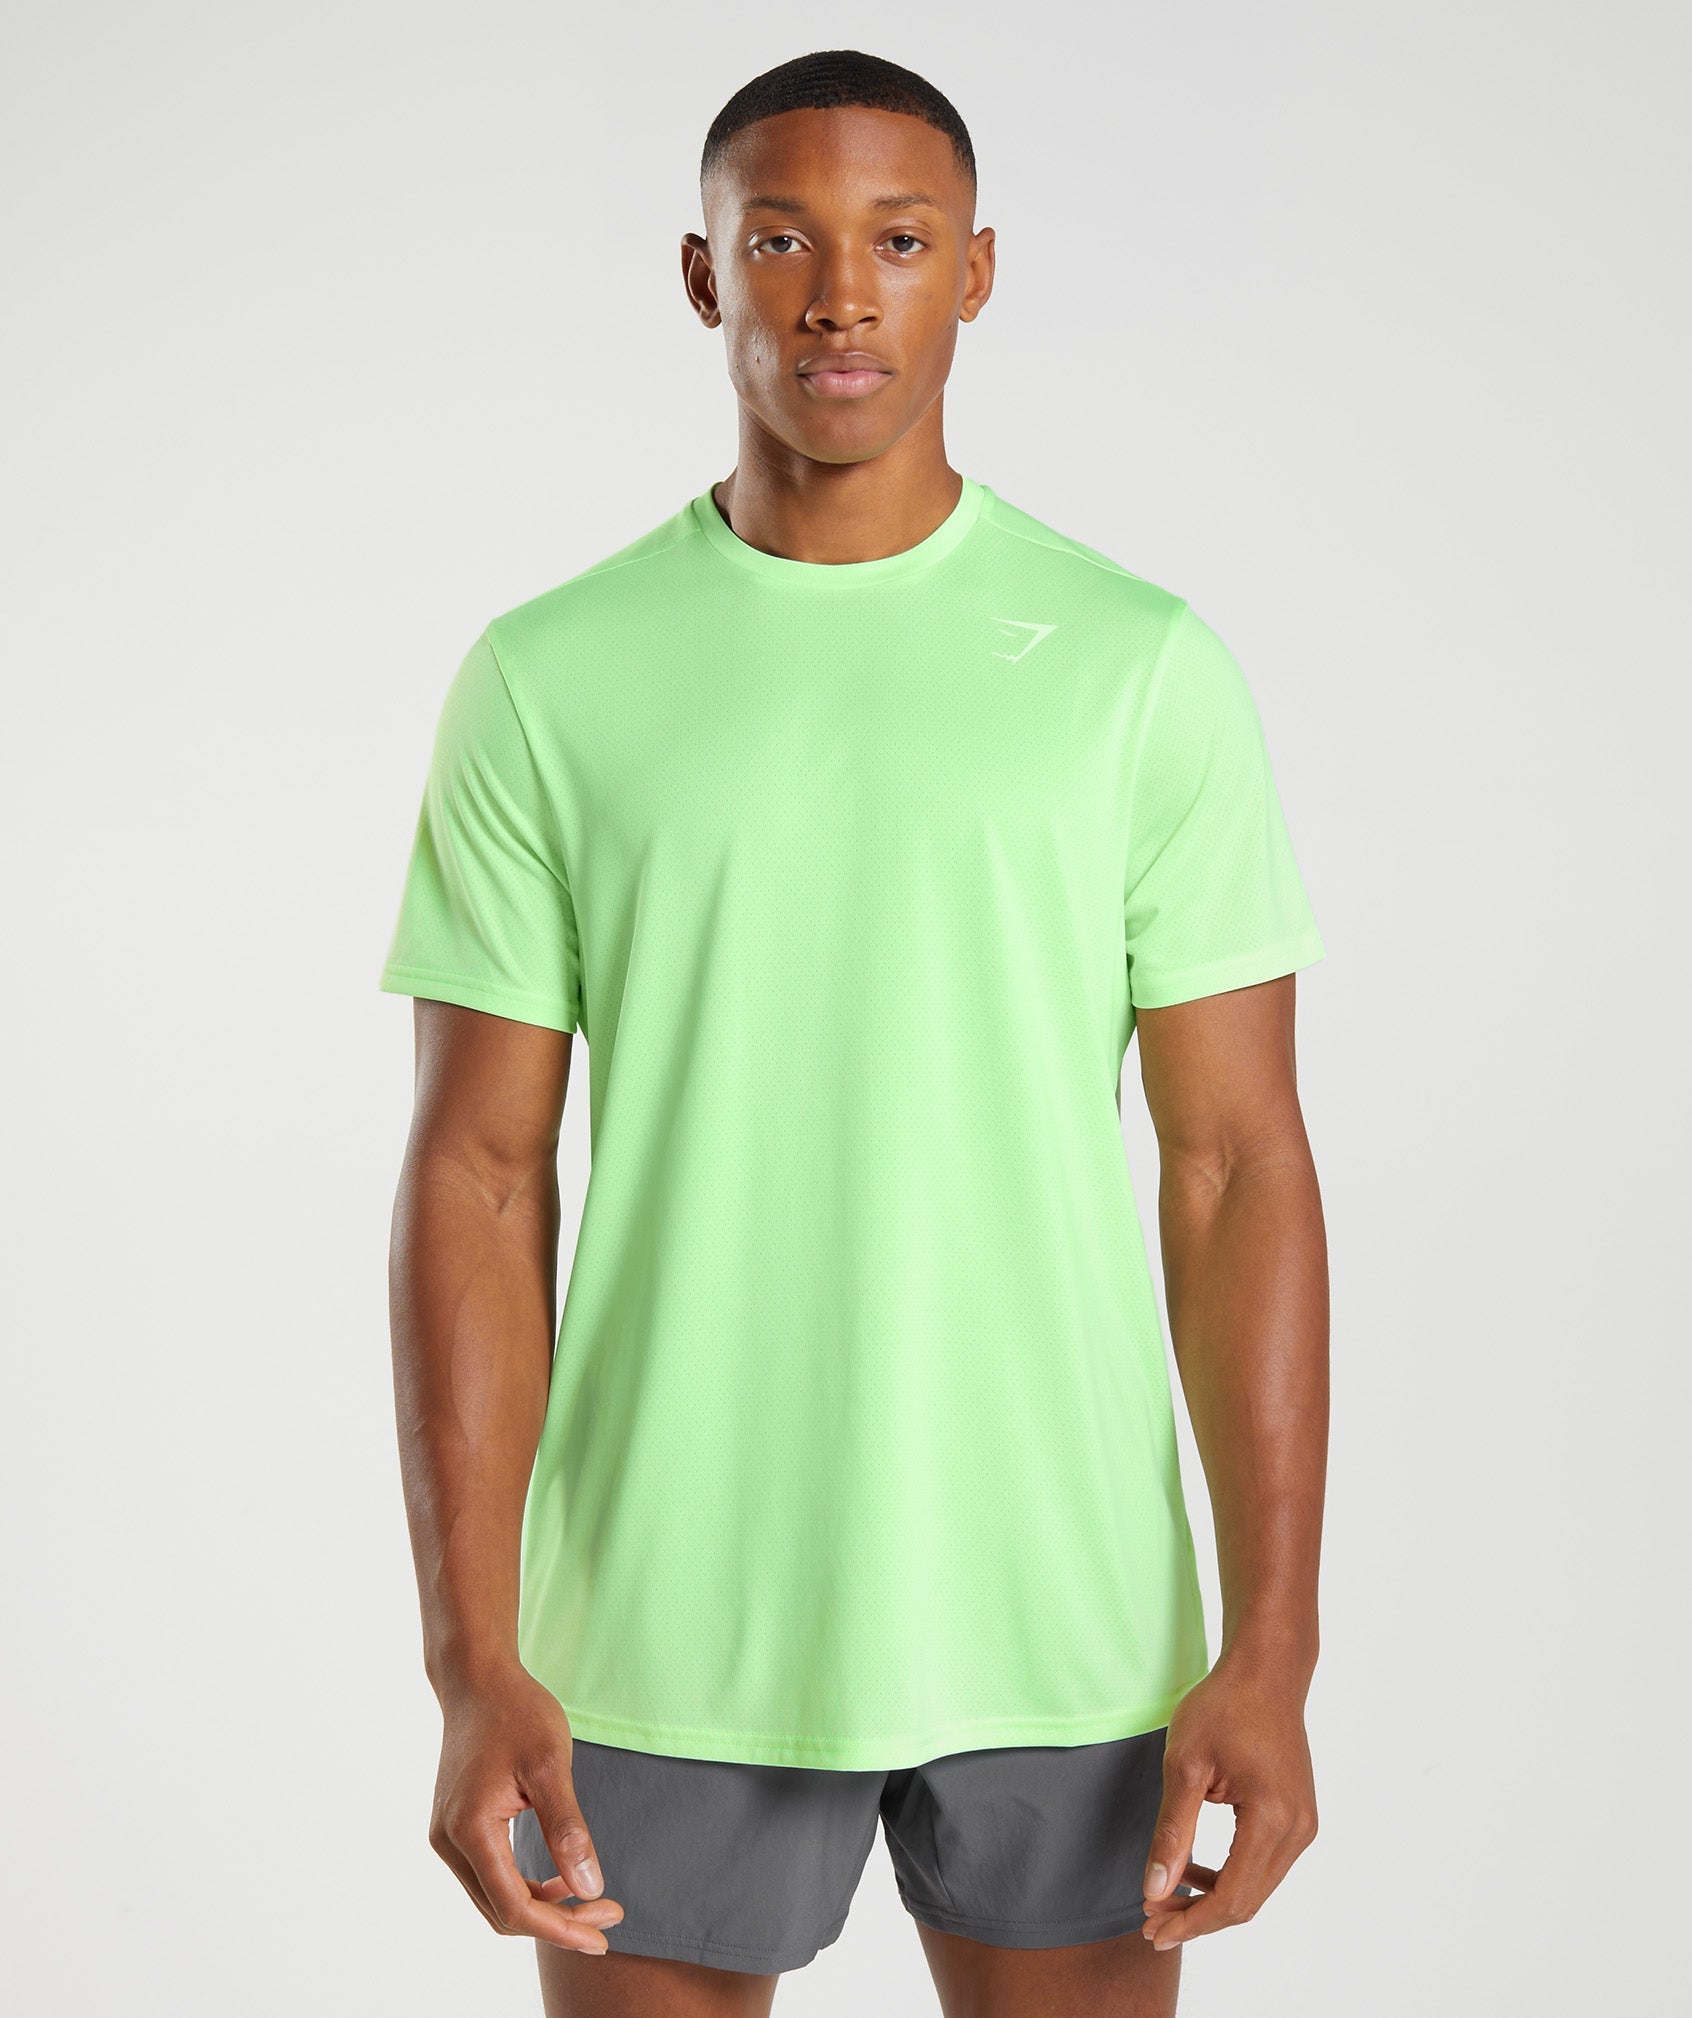 Arrival T-Shirt in Fluo Mint - view 1